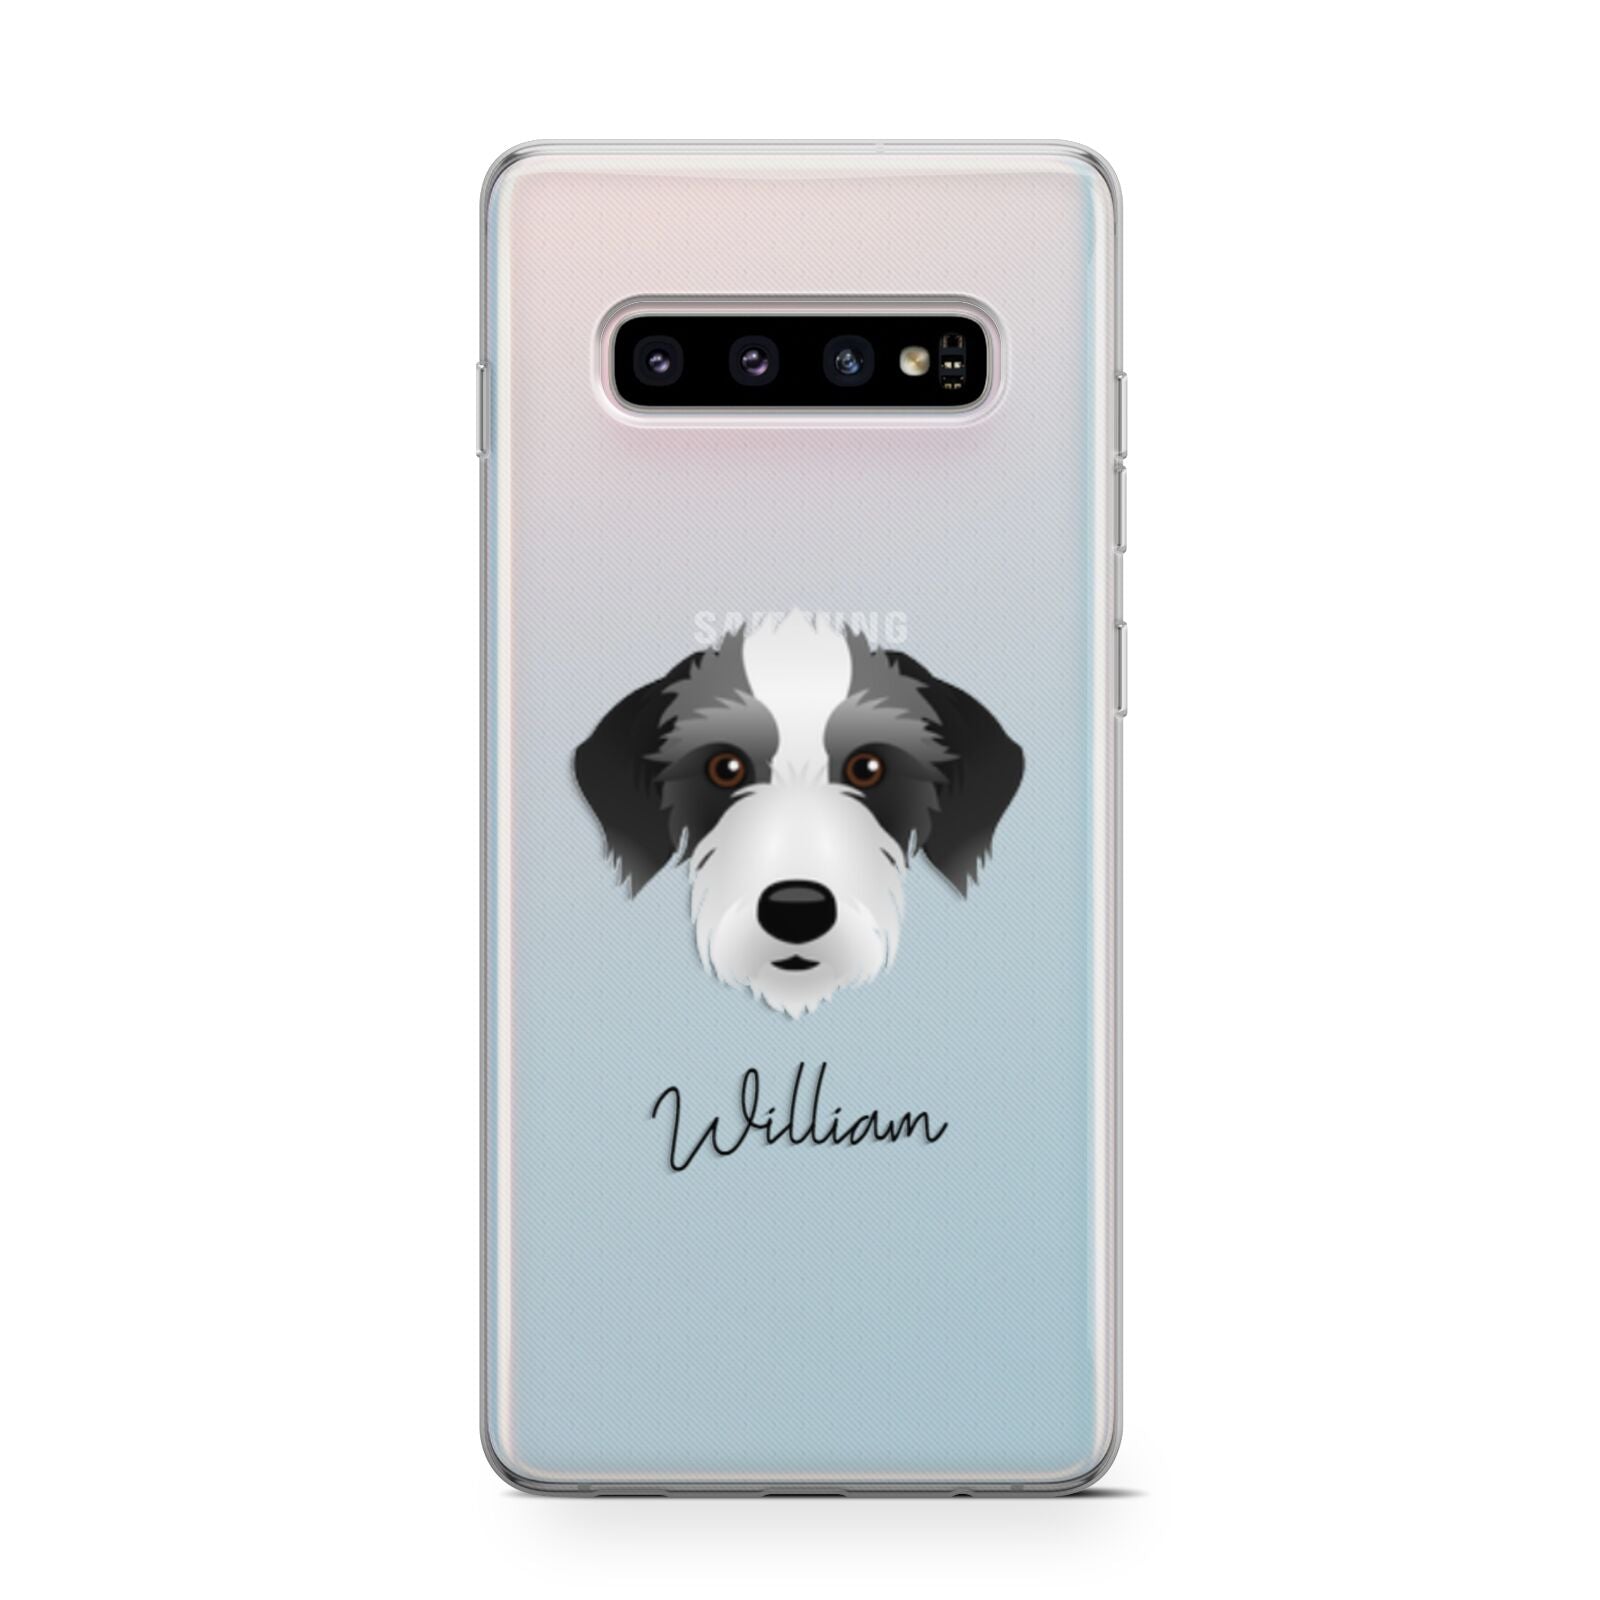 Bedlington Whippet Personalised Samsung Galaxy S10 Case